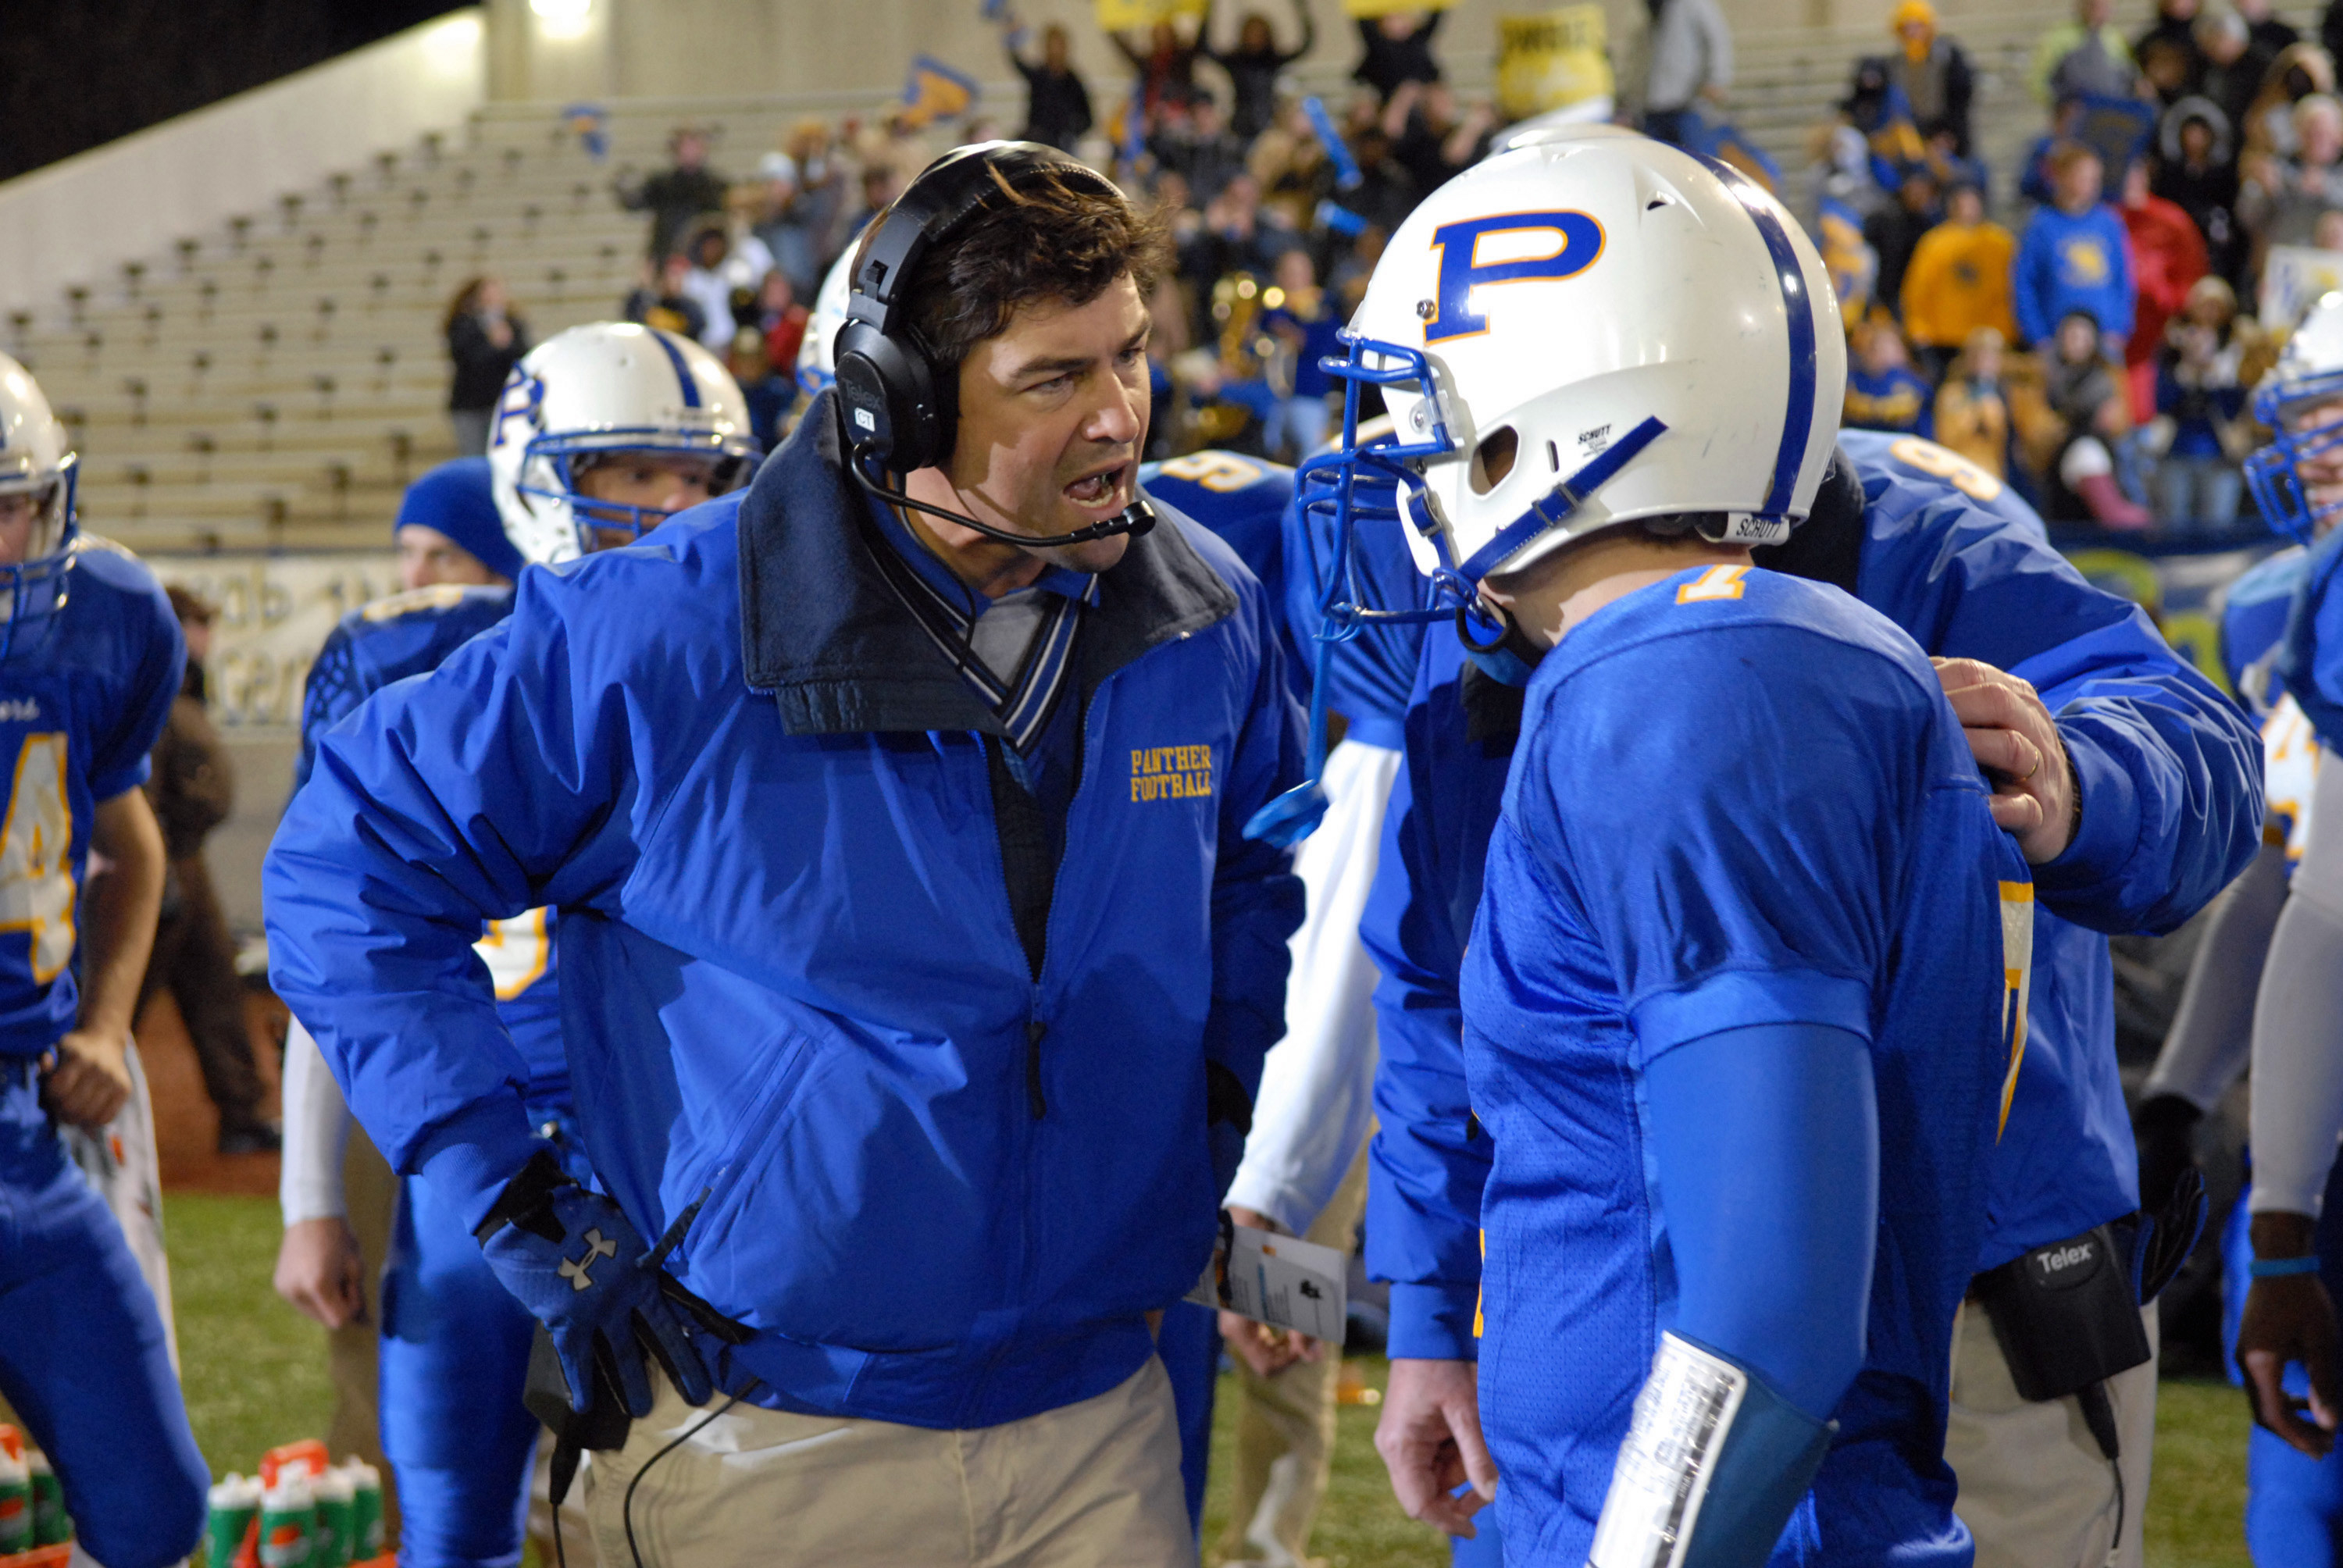 Kyle Chandler yells at Zach Gilford on the sidelines of a football field